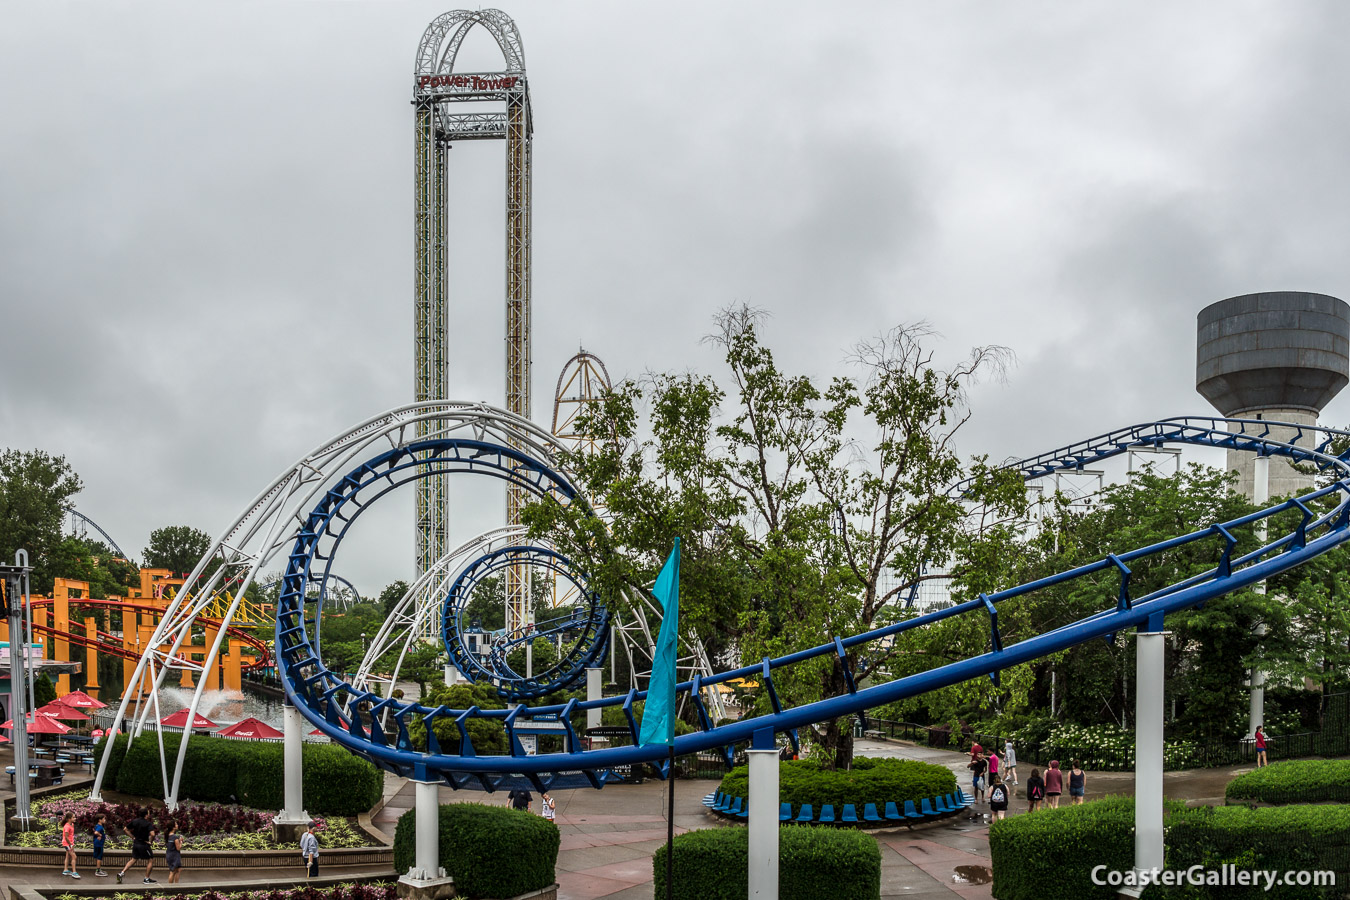 How much does a roller coaster cost? This one was over $7 million!